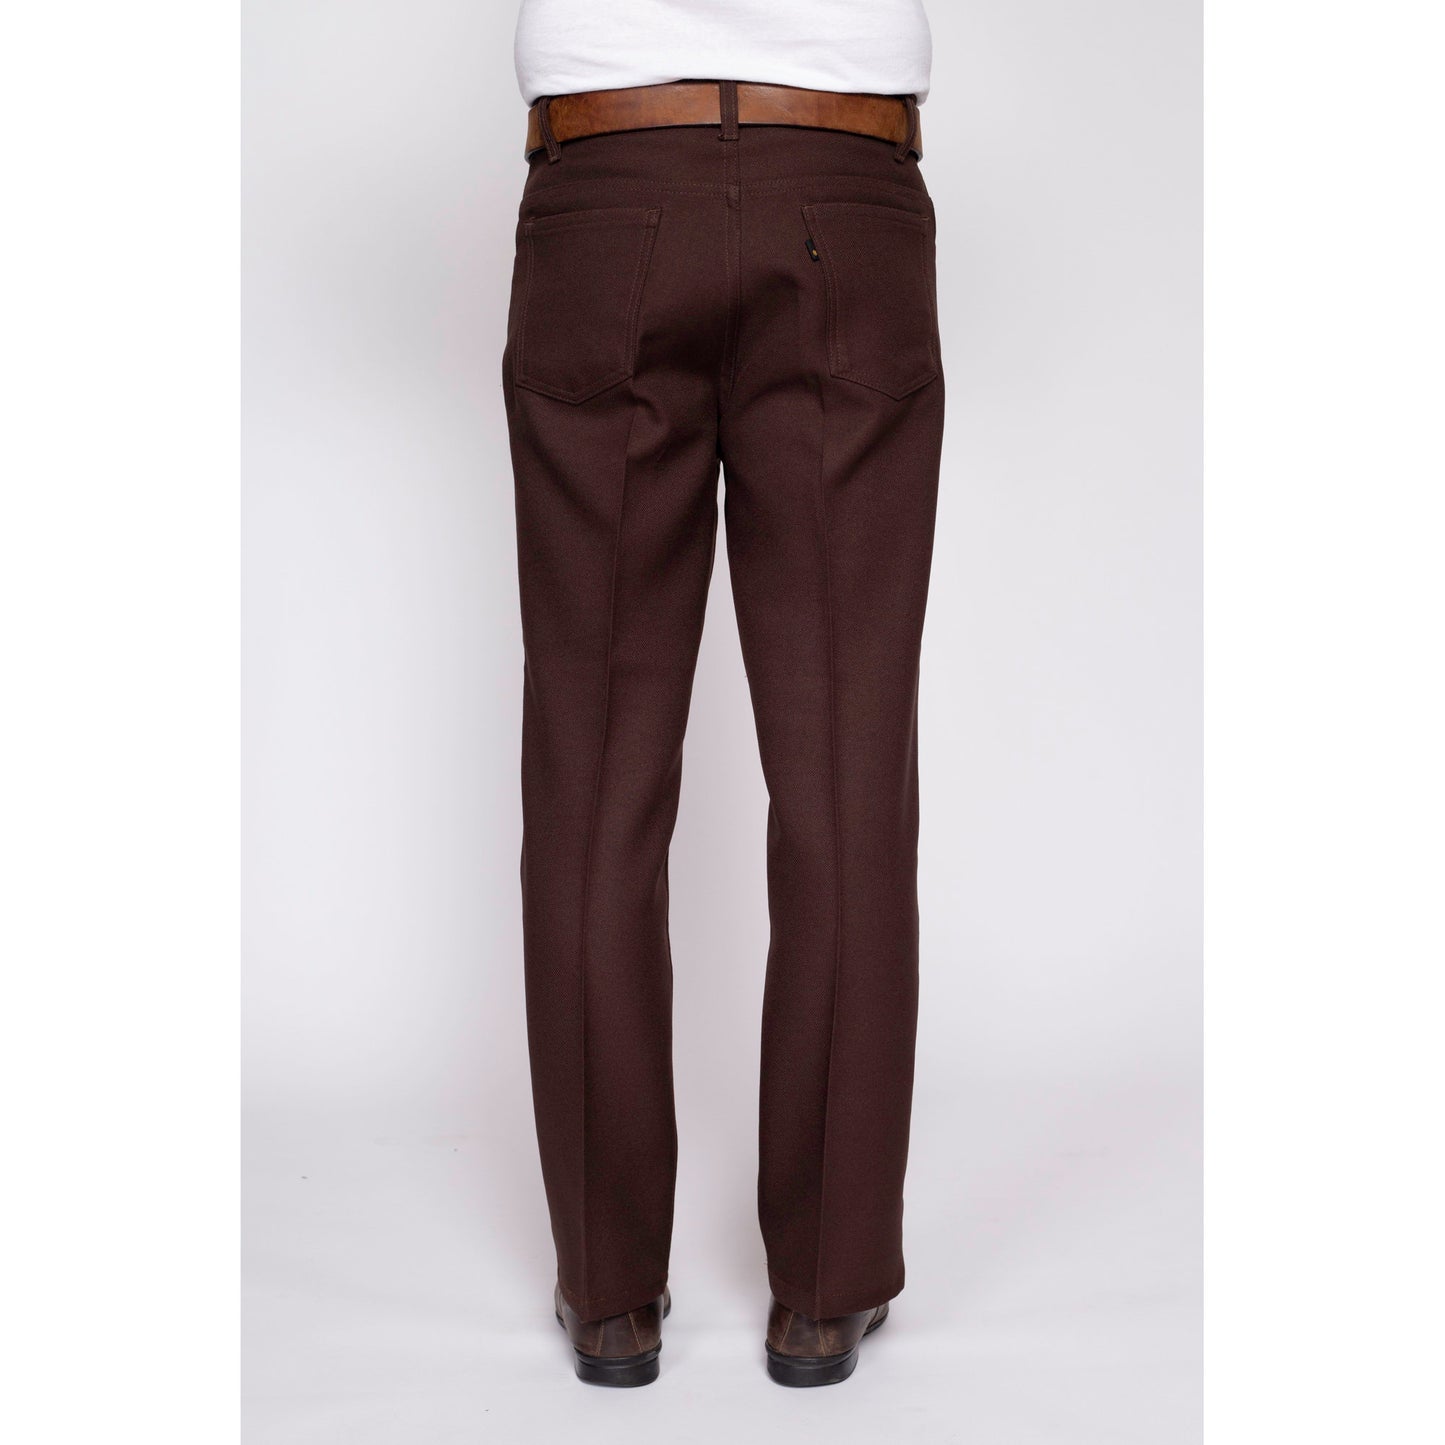 70s Levi's Brown Trousers - 34x32 | Retro Vintage Straight Leg Rockabilly Polyester Pants